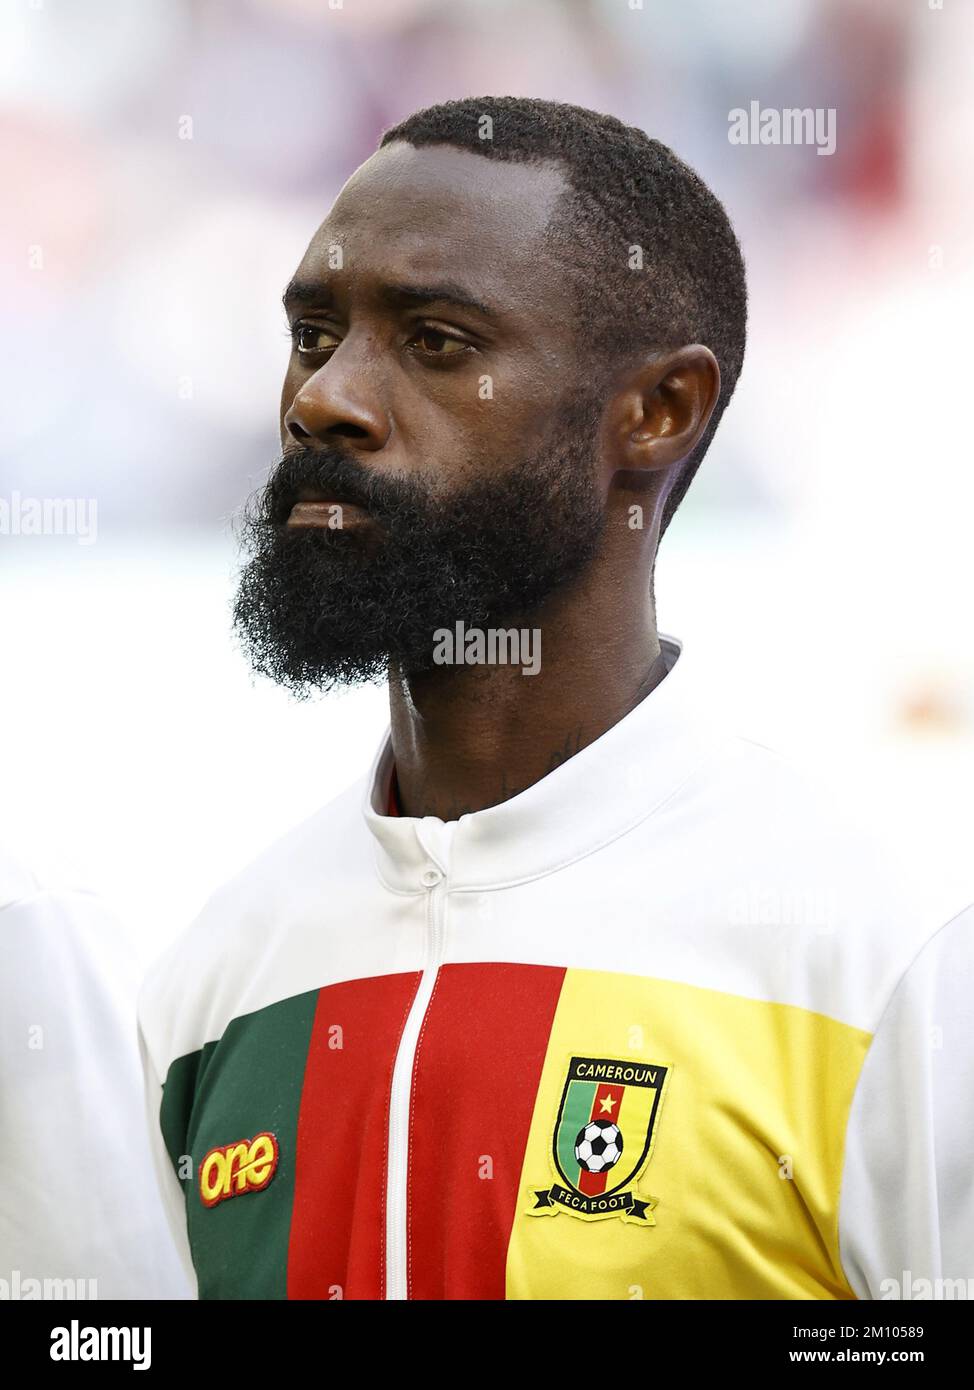 AL WAKRAH - Nicolas N Koulou of Cameroon during the FIFA World Cup Qatar 2022 group G match between Cameroon and Serbia at Al Janoub Stadium on November 28, 2022 in Al Wakrah, Qatar. AP | Dutch Height | MAURICE OF STONE Stock Photo